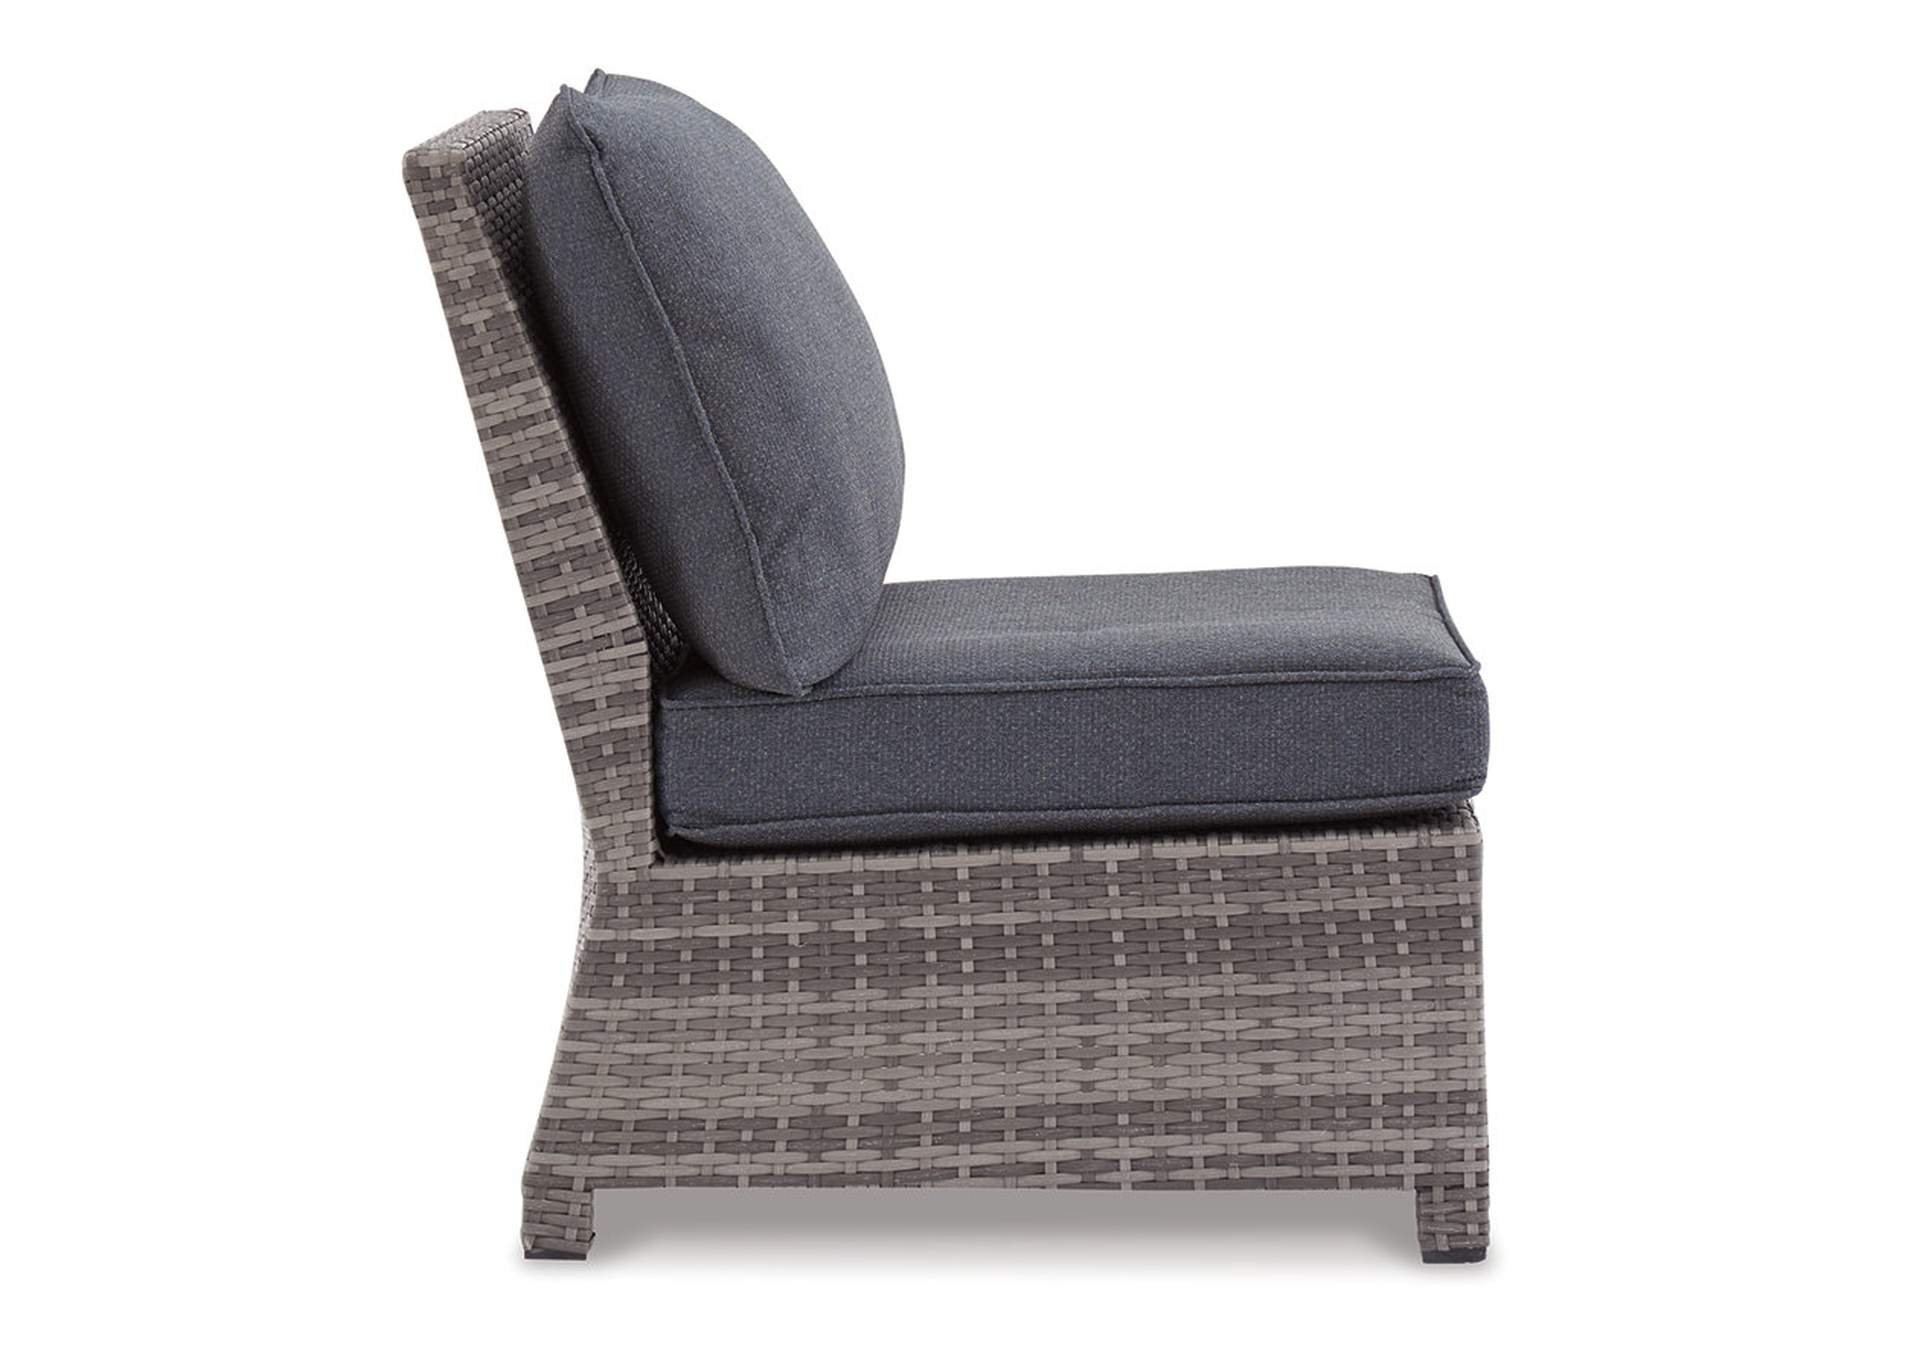 Salem Beach Armless Chair with Cushion,Direct To Consumer Express